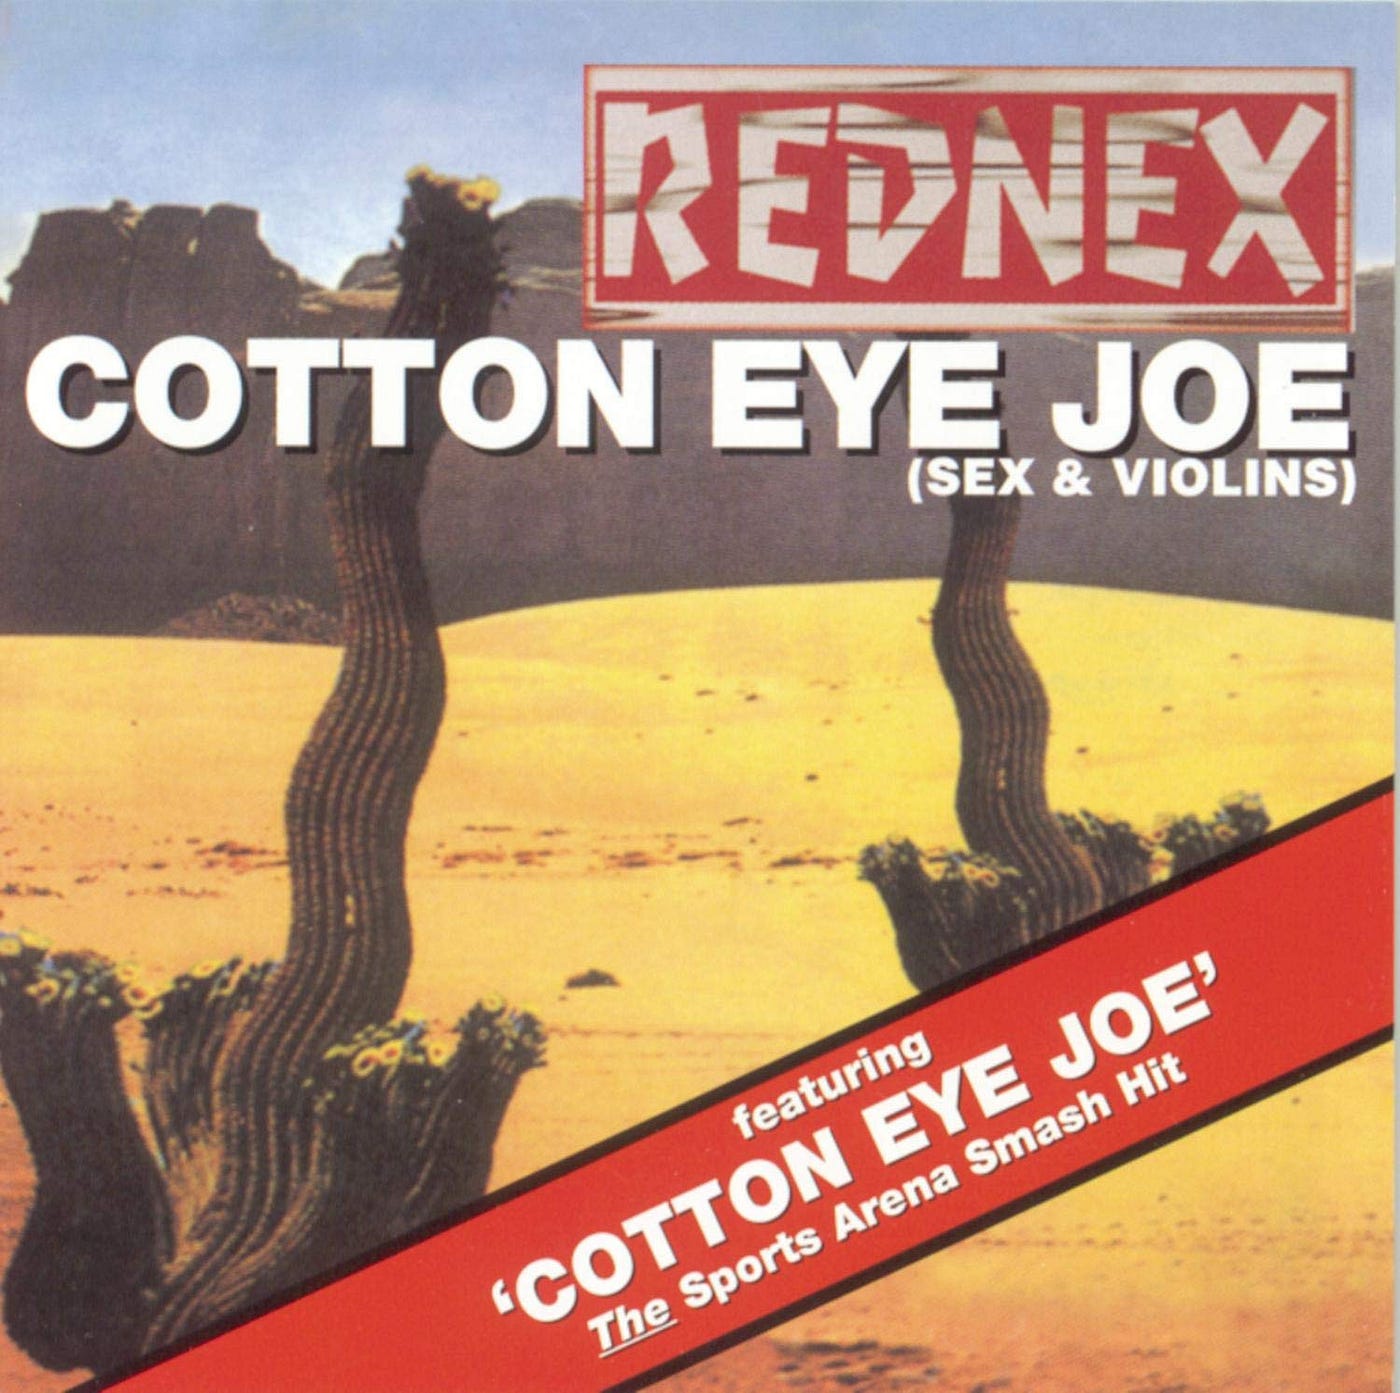 Cotton Eye Joe by Rednex Is World's Sexiest Song, Because You